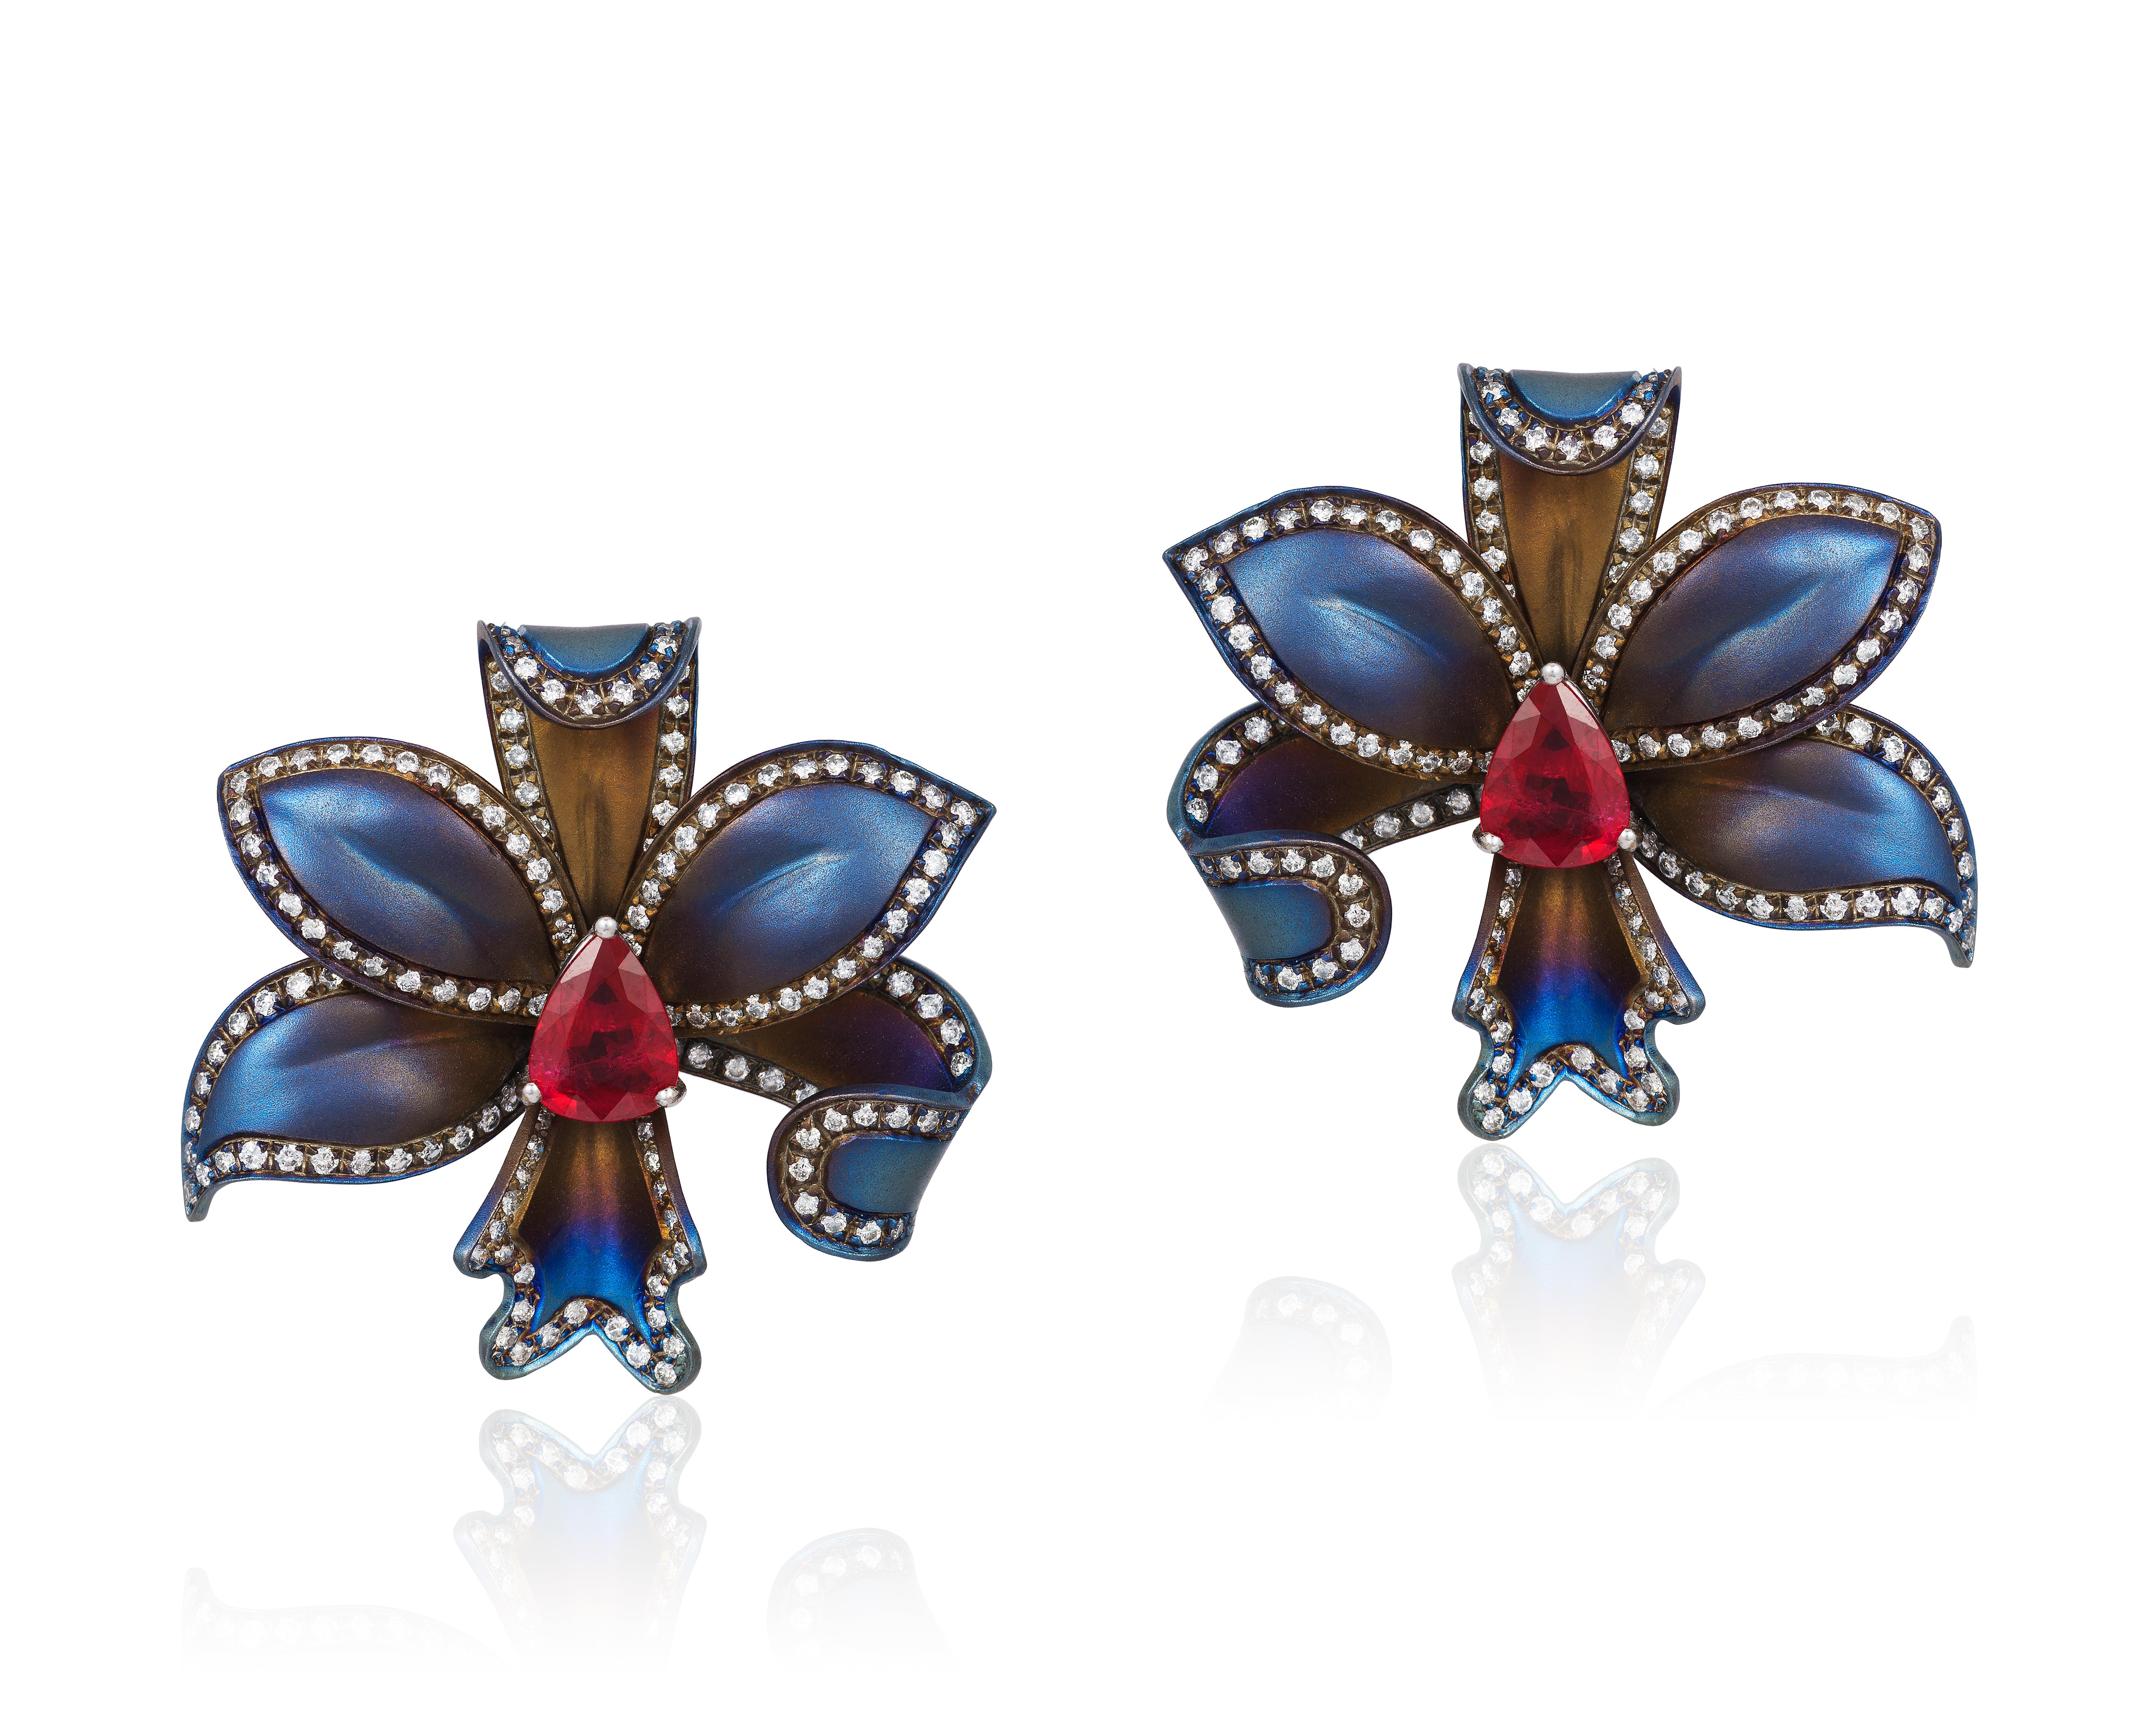 Andreoli Titanium Ruby Diamond Flower Earrings Clip On Ear. Andreoli was one of the first jewelry creators to utilize titanium in high jewelry over 18KT or Platinum. The use of titanium allows for bigger and bolder designs without compromising on